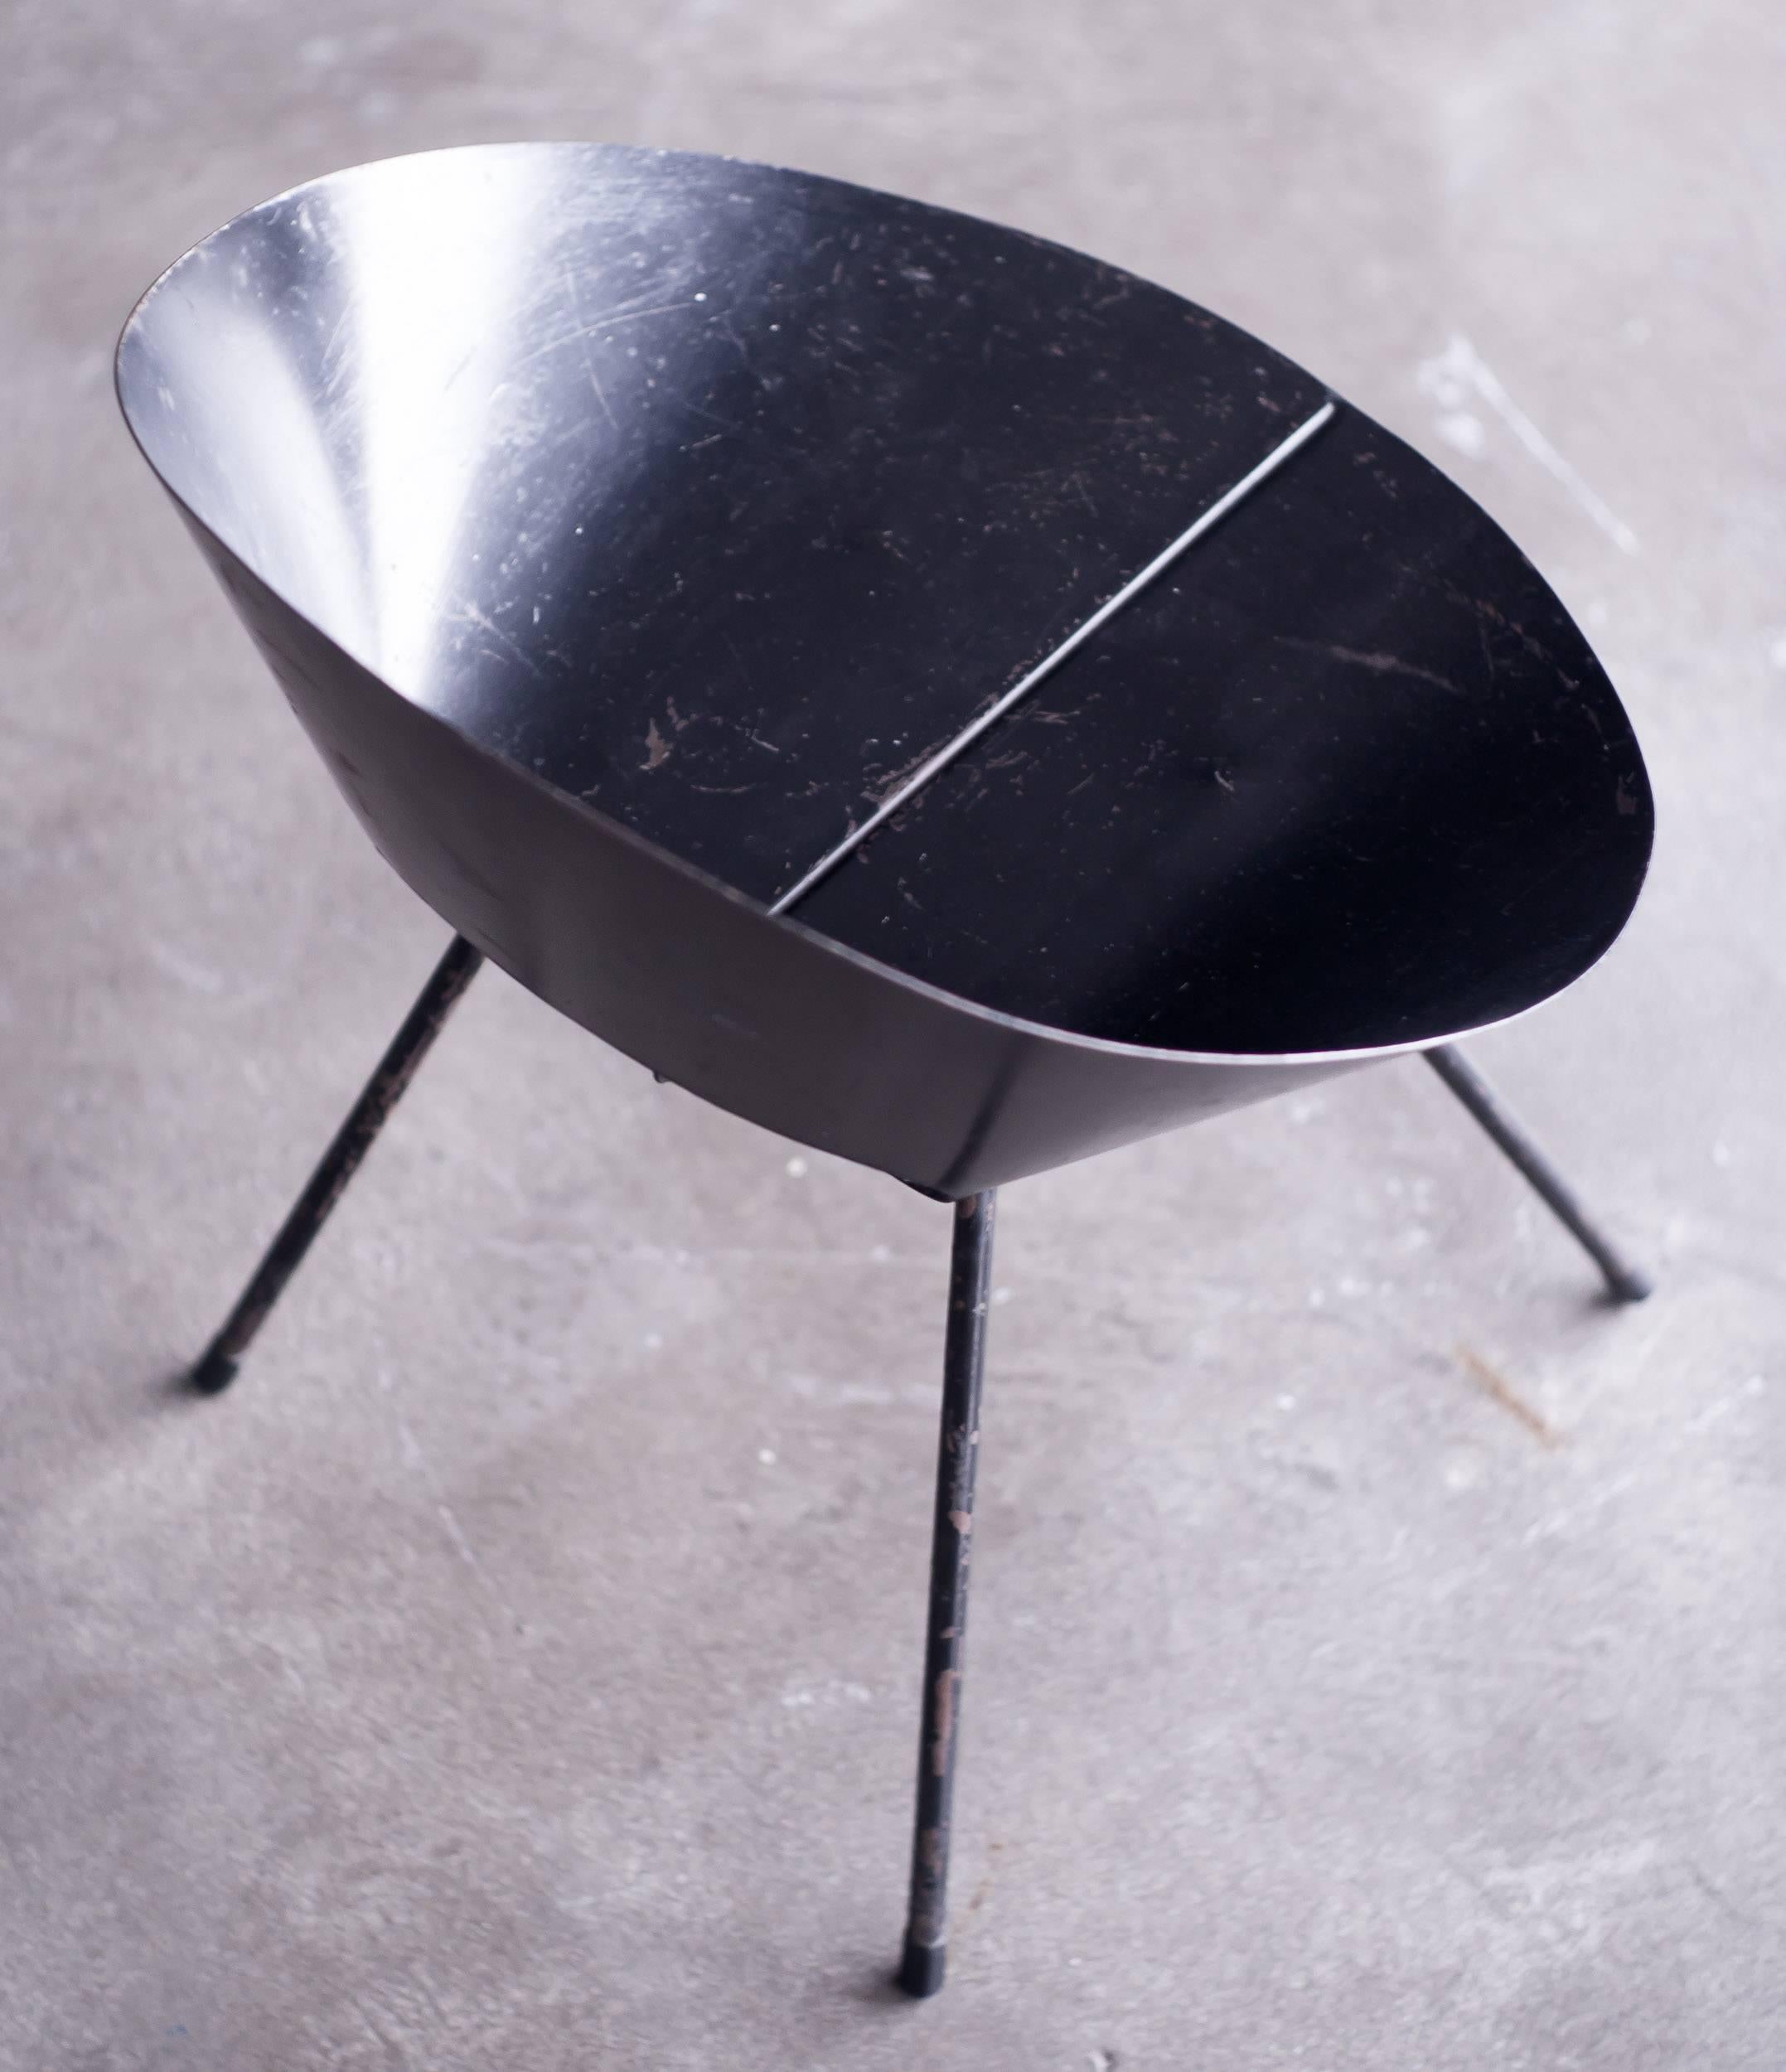 Model #132 chair designed in 1948 by Donald Knorr for Knoll International. Great modernist design. Sheet metal seat shell, bent rod steel legs. Produced from 1950-52. Donald Knorr was co-awarded first prize at the Competition for Low Cost Furniture